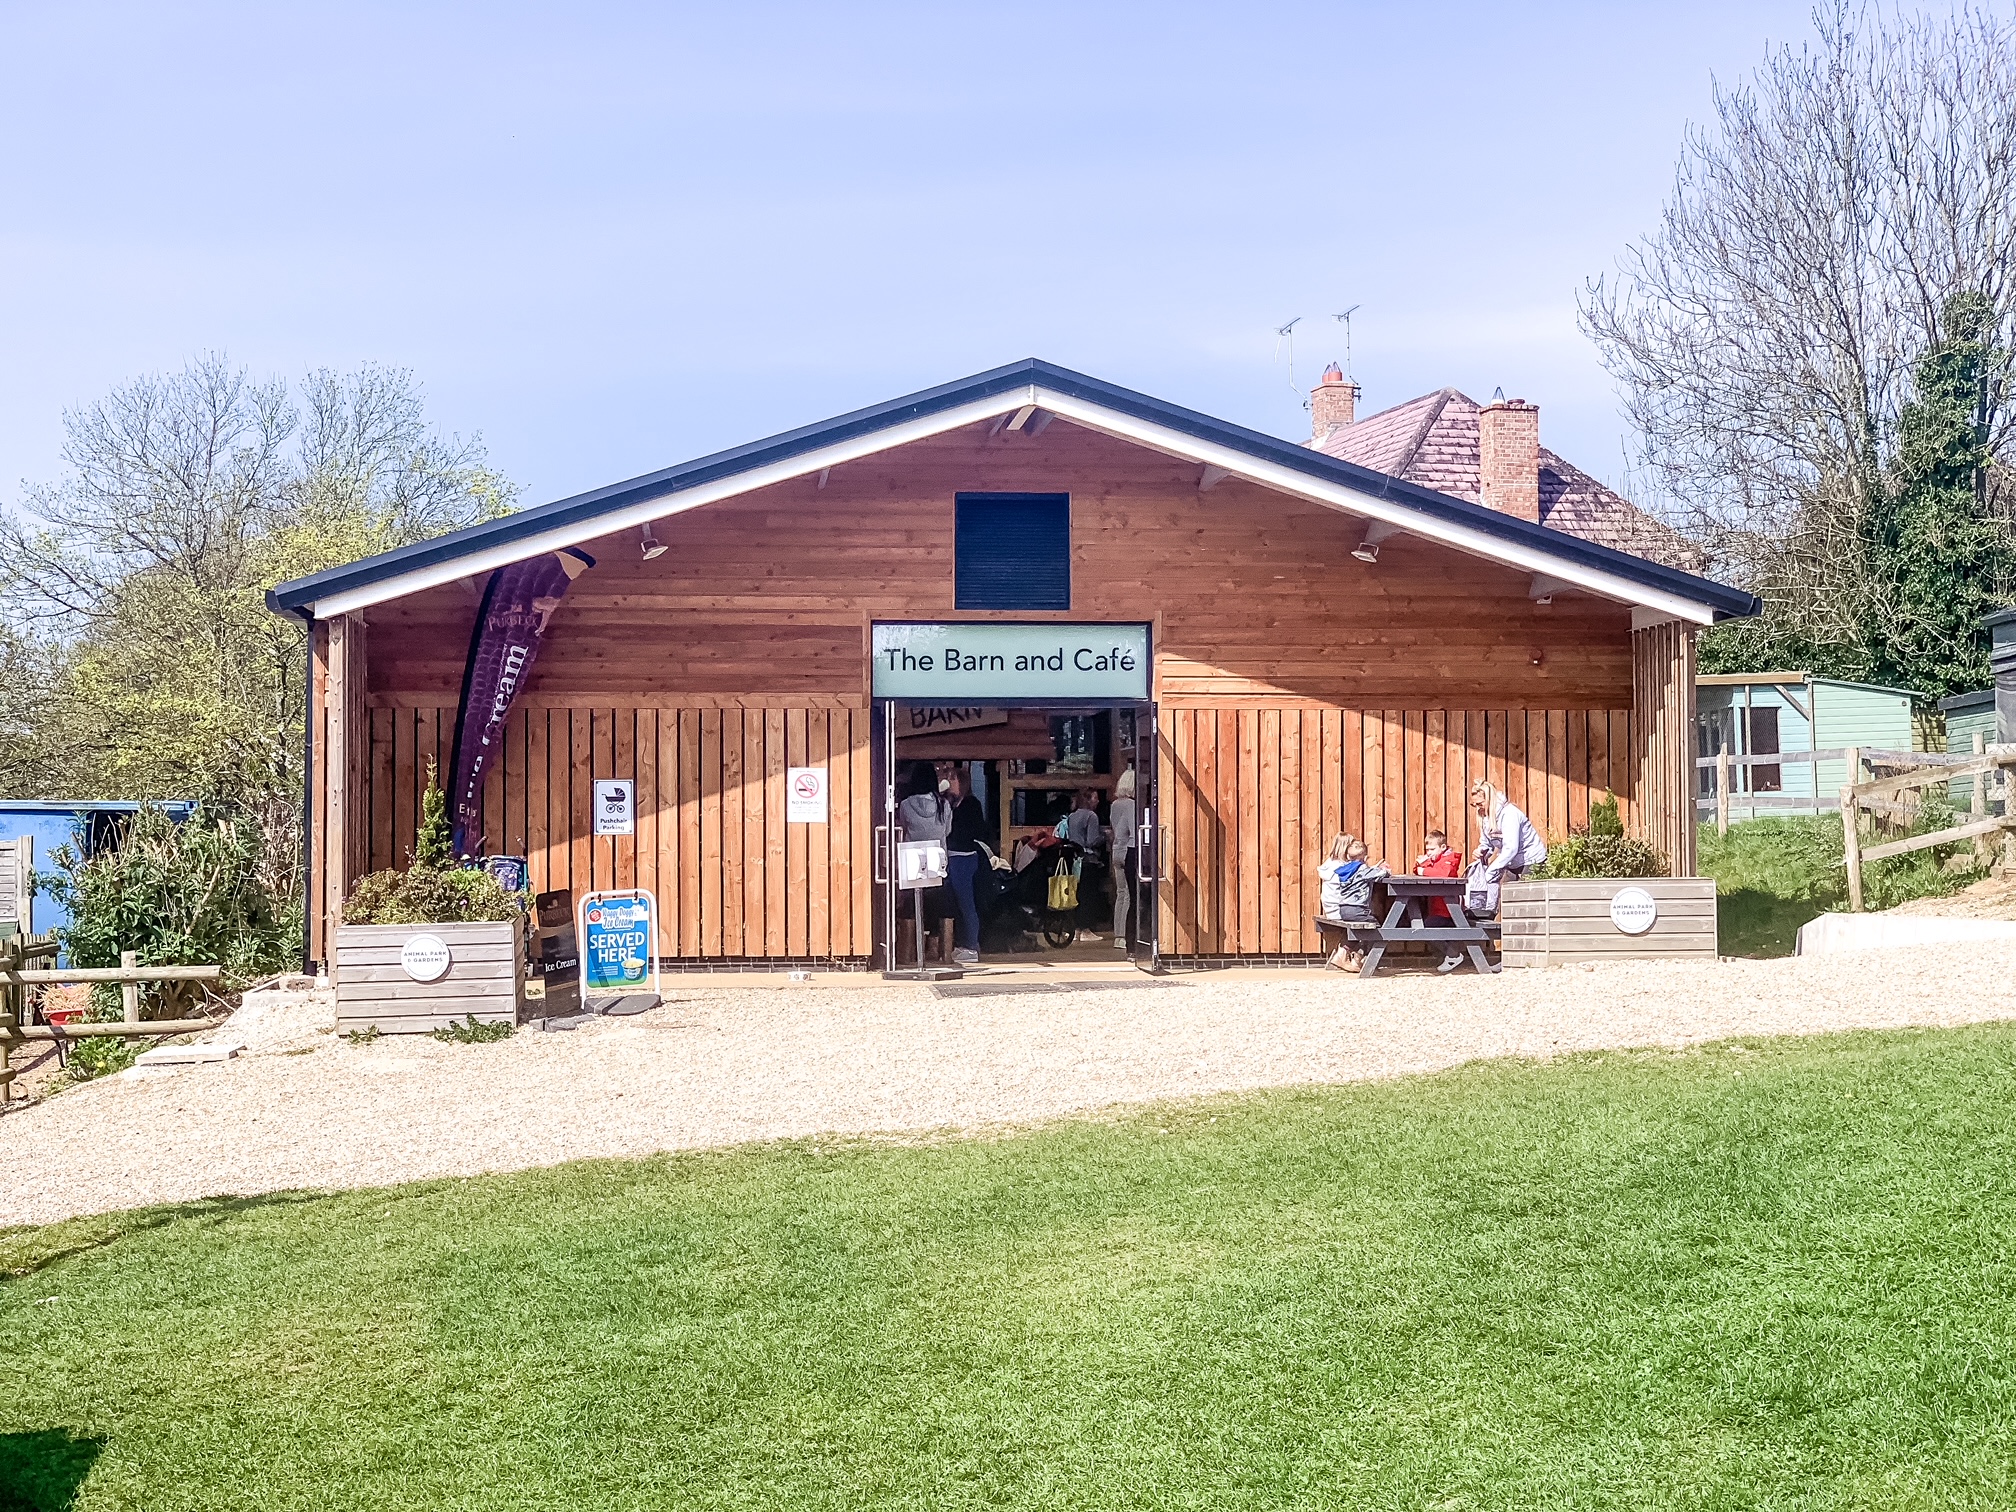 Kingston Maurward Animal Park and Gardens - Large wooden structure with 'The Barn & Cafe' outside